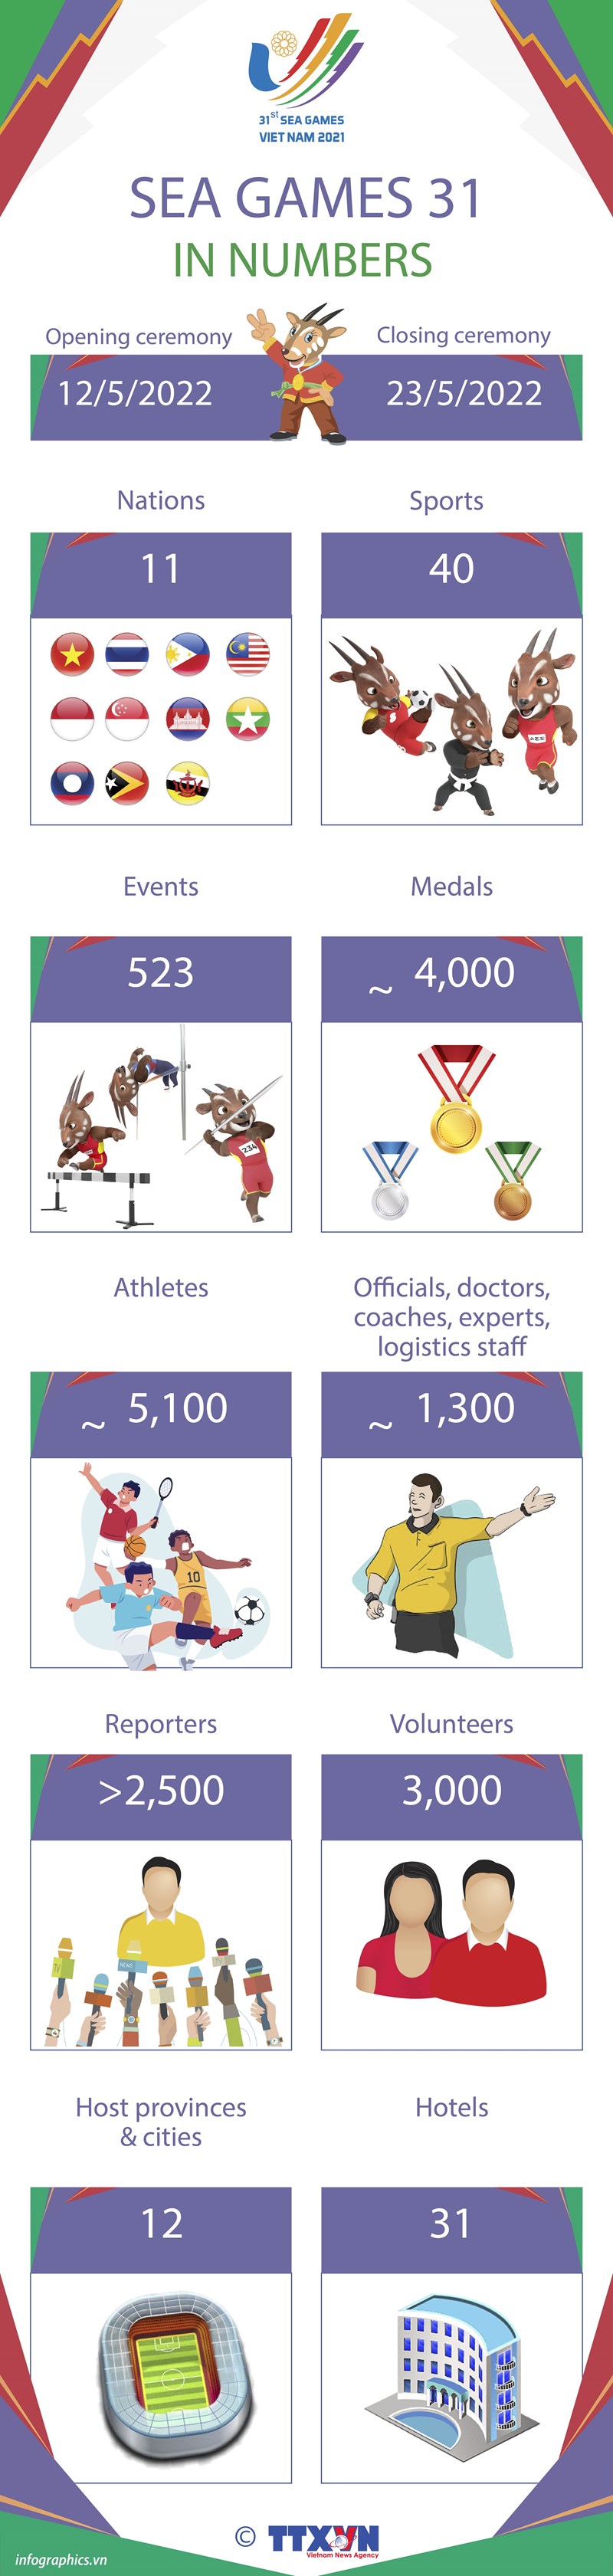 SEA Games 31 in numbers hinh anh 1